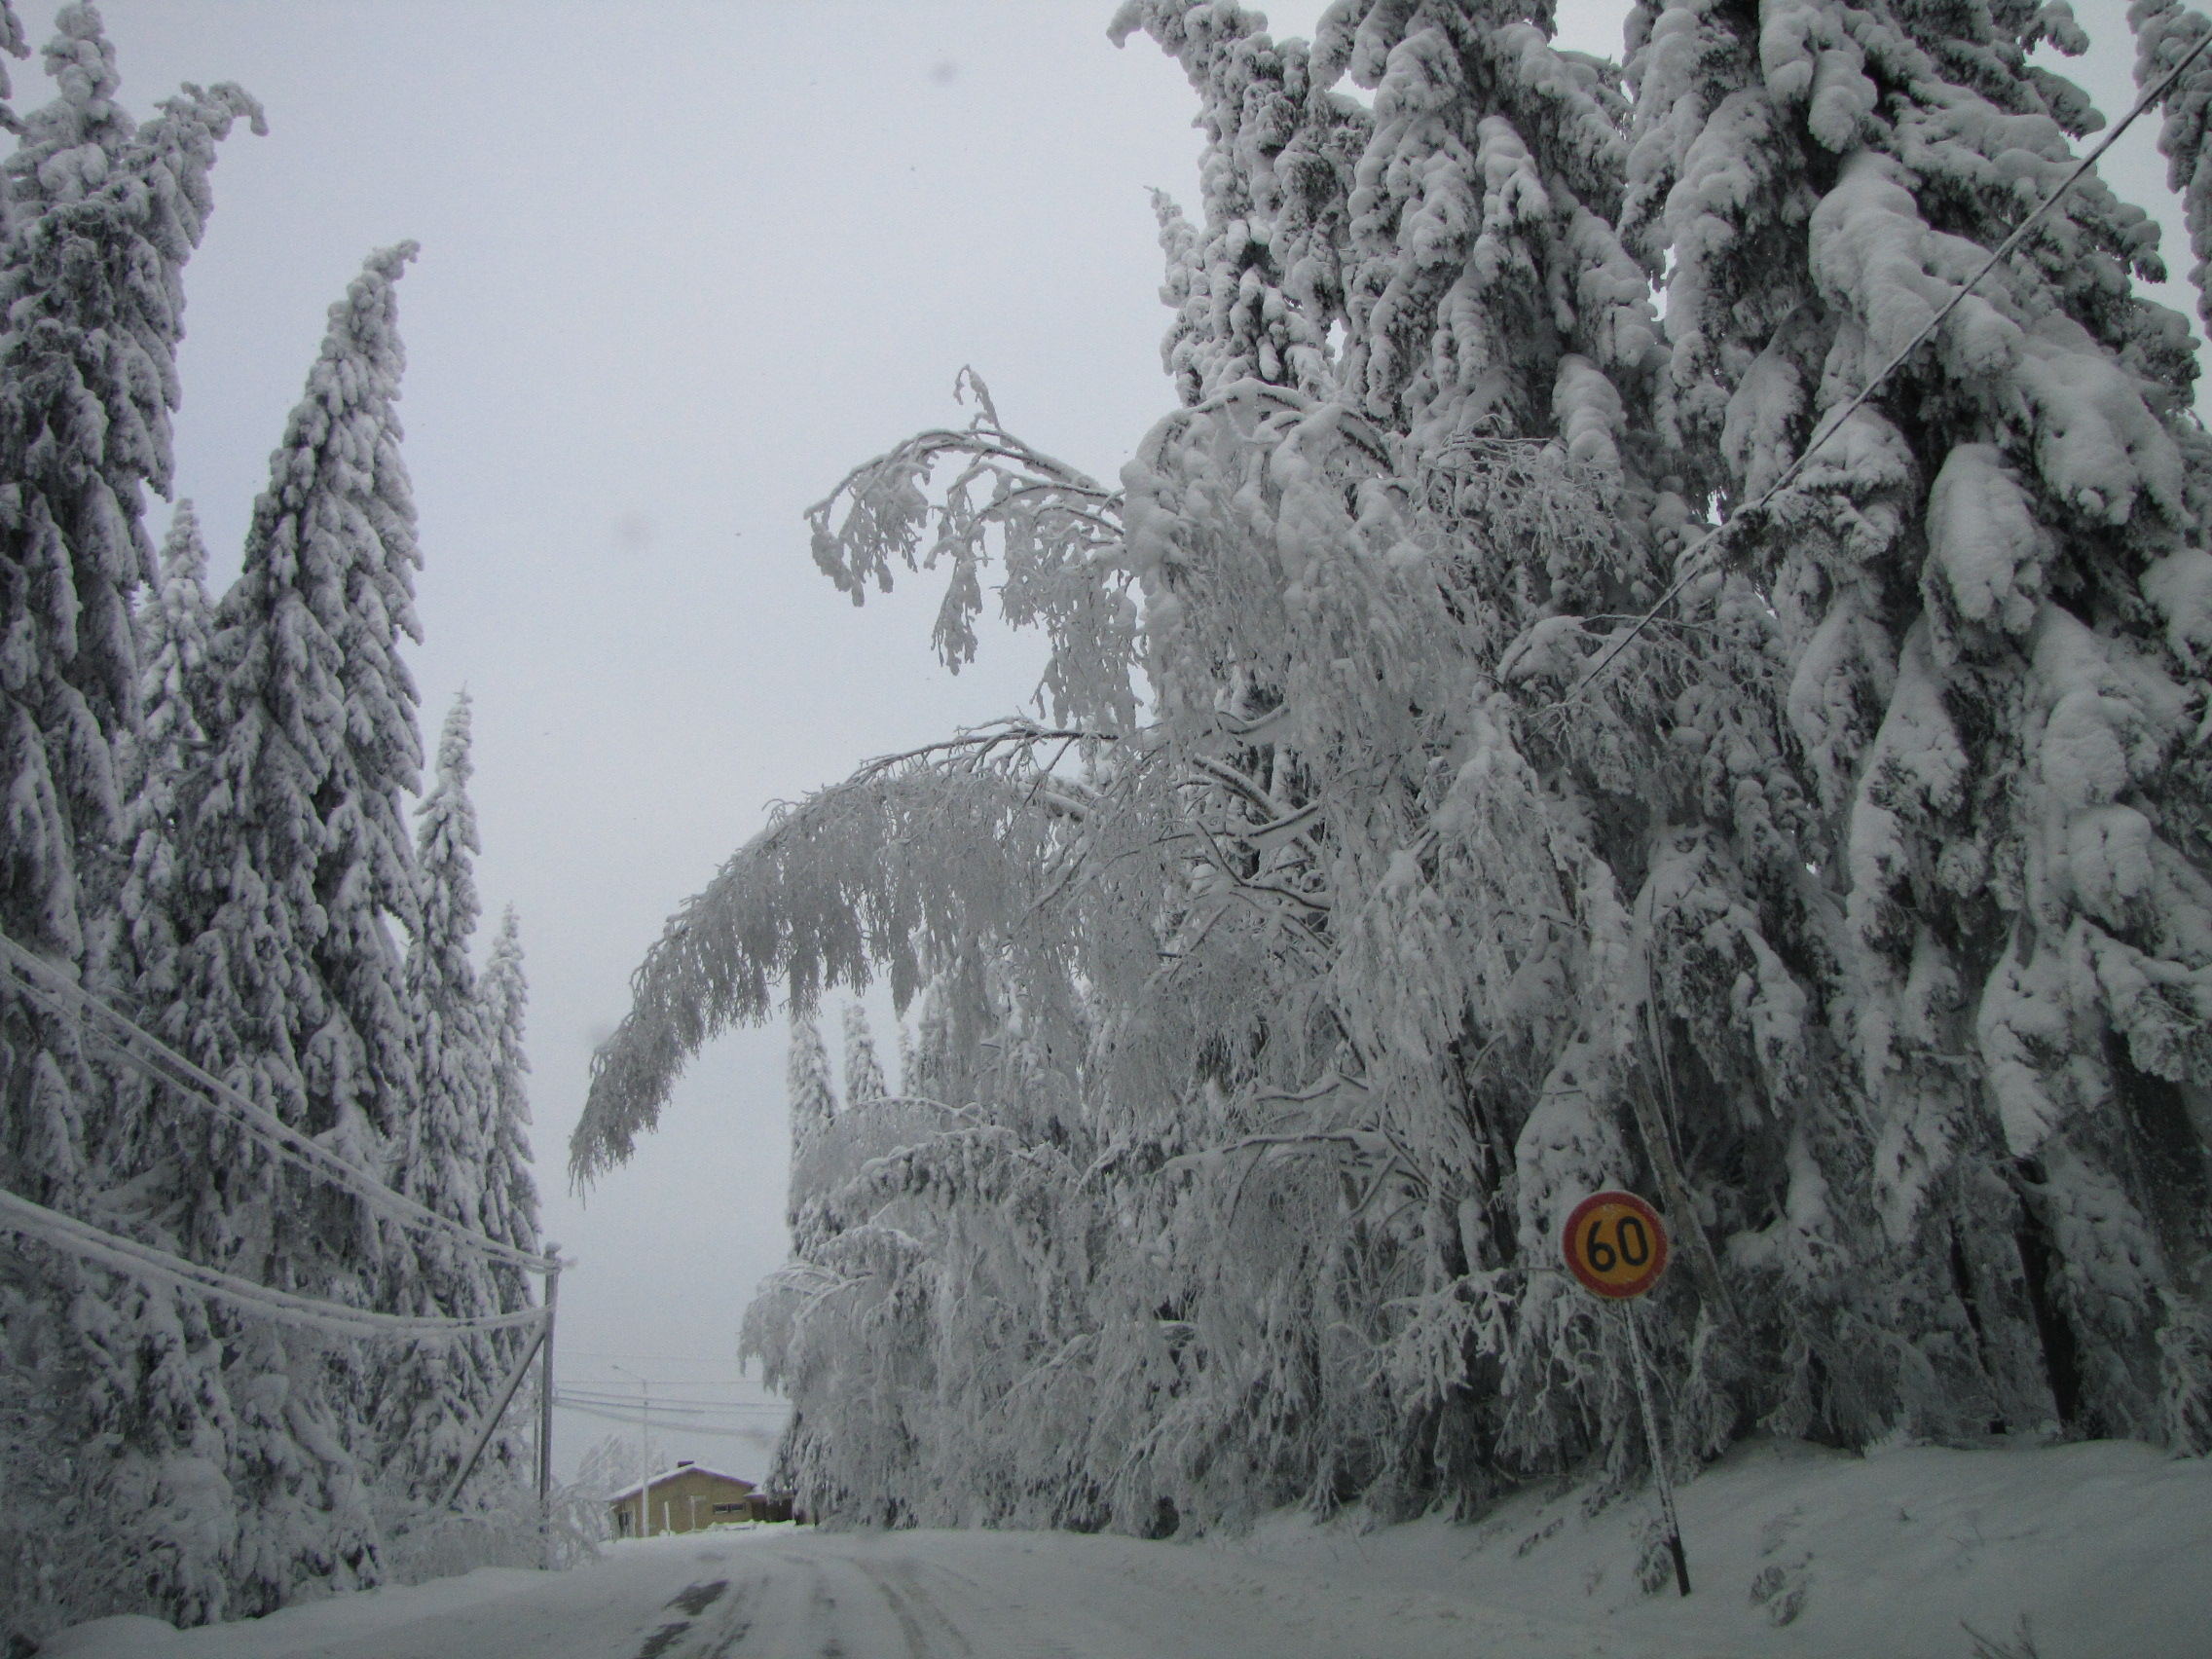 Birches bended over a road by snow load. Photo: Elenia